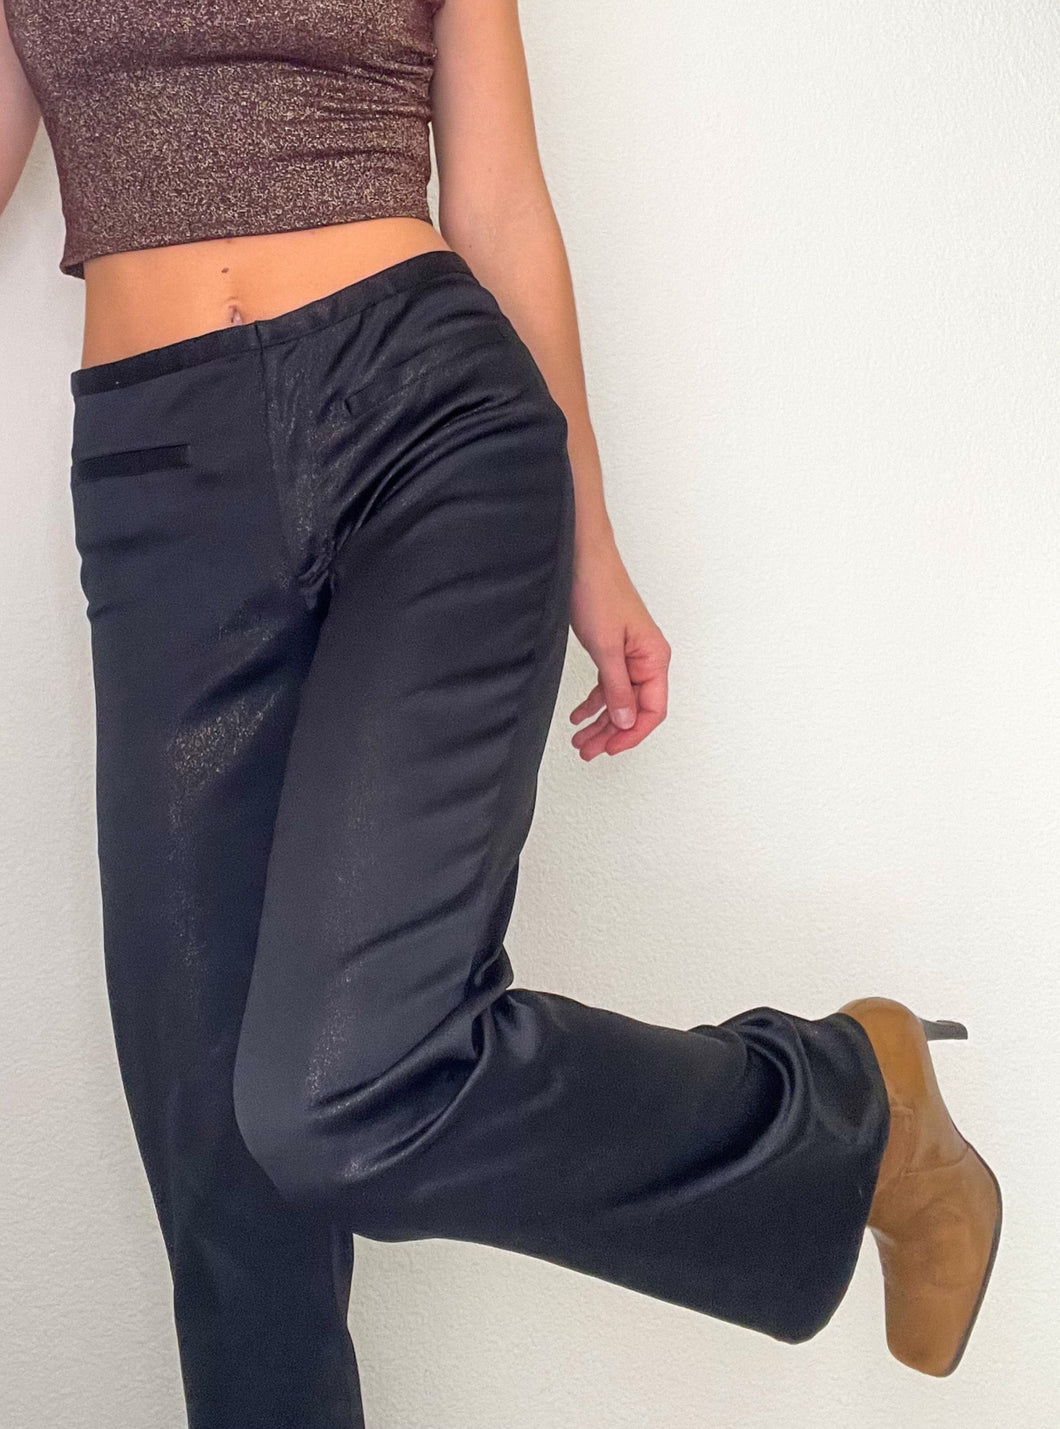 Y2K Black and Gold Glitter Flare Pants (S)